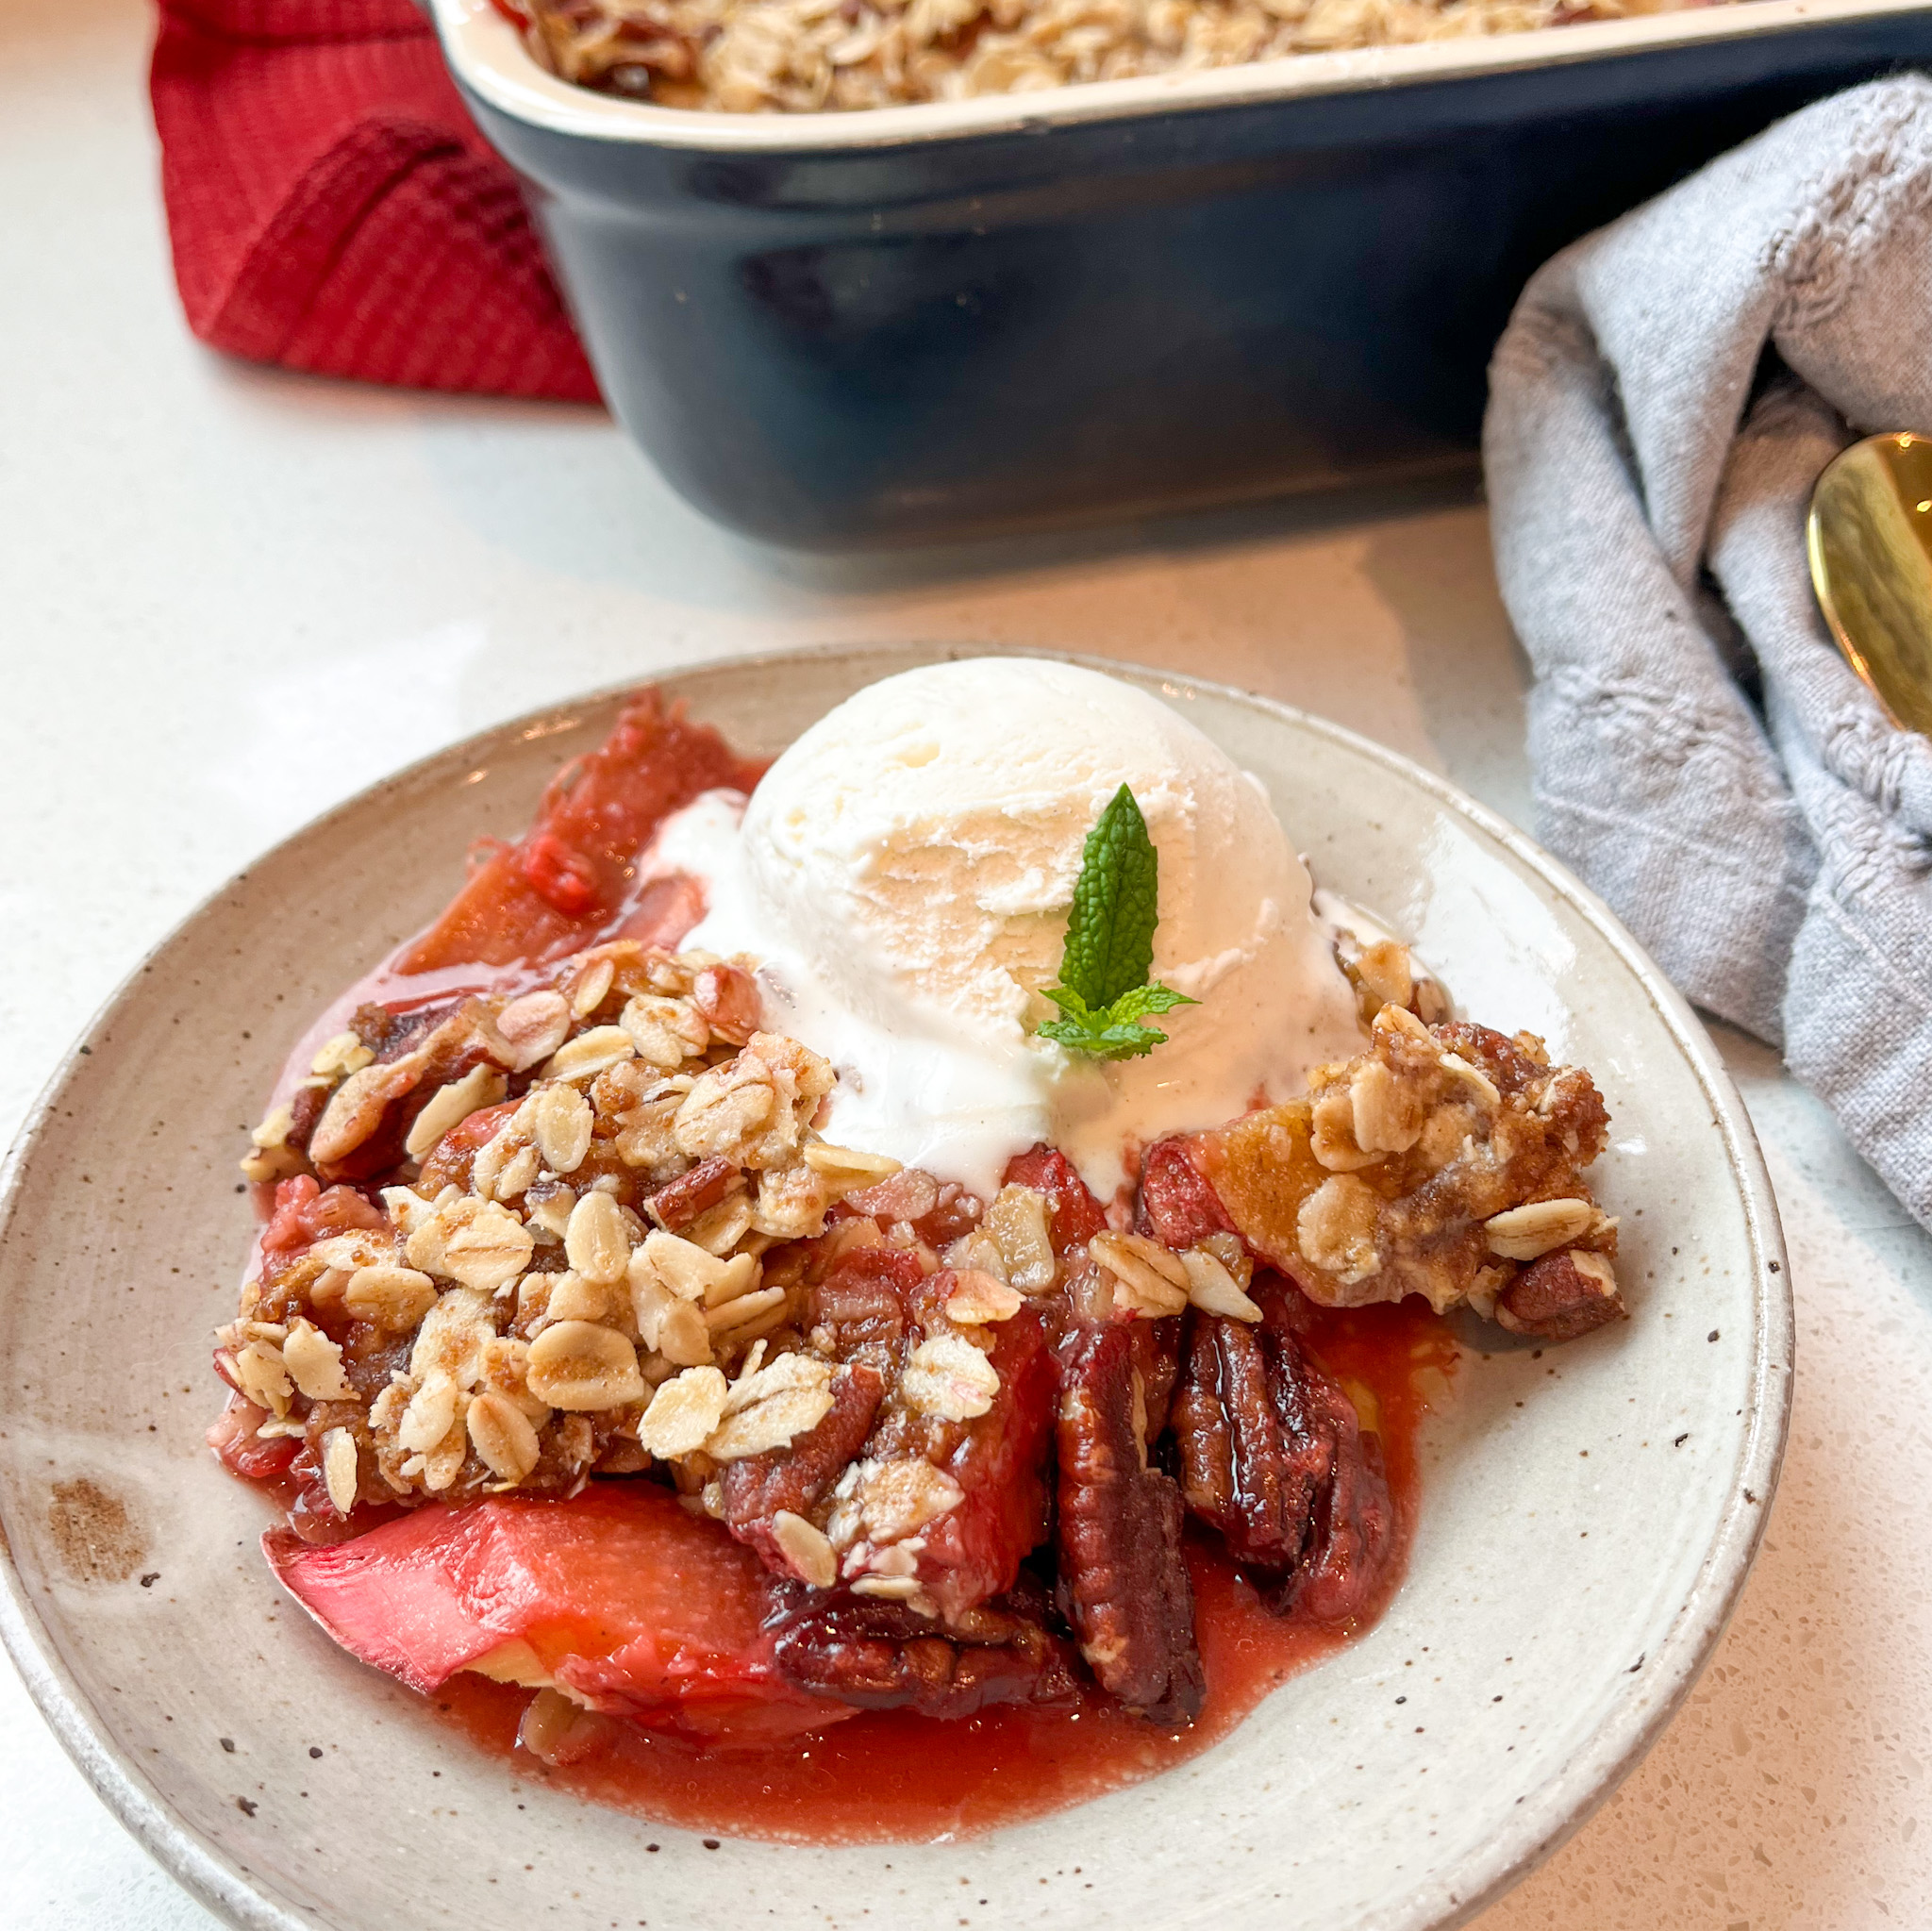 Strawberry Rhubarb Crisp on a stoneware plate with a scoop of ice cream and a garnish of mint